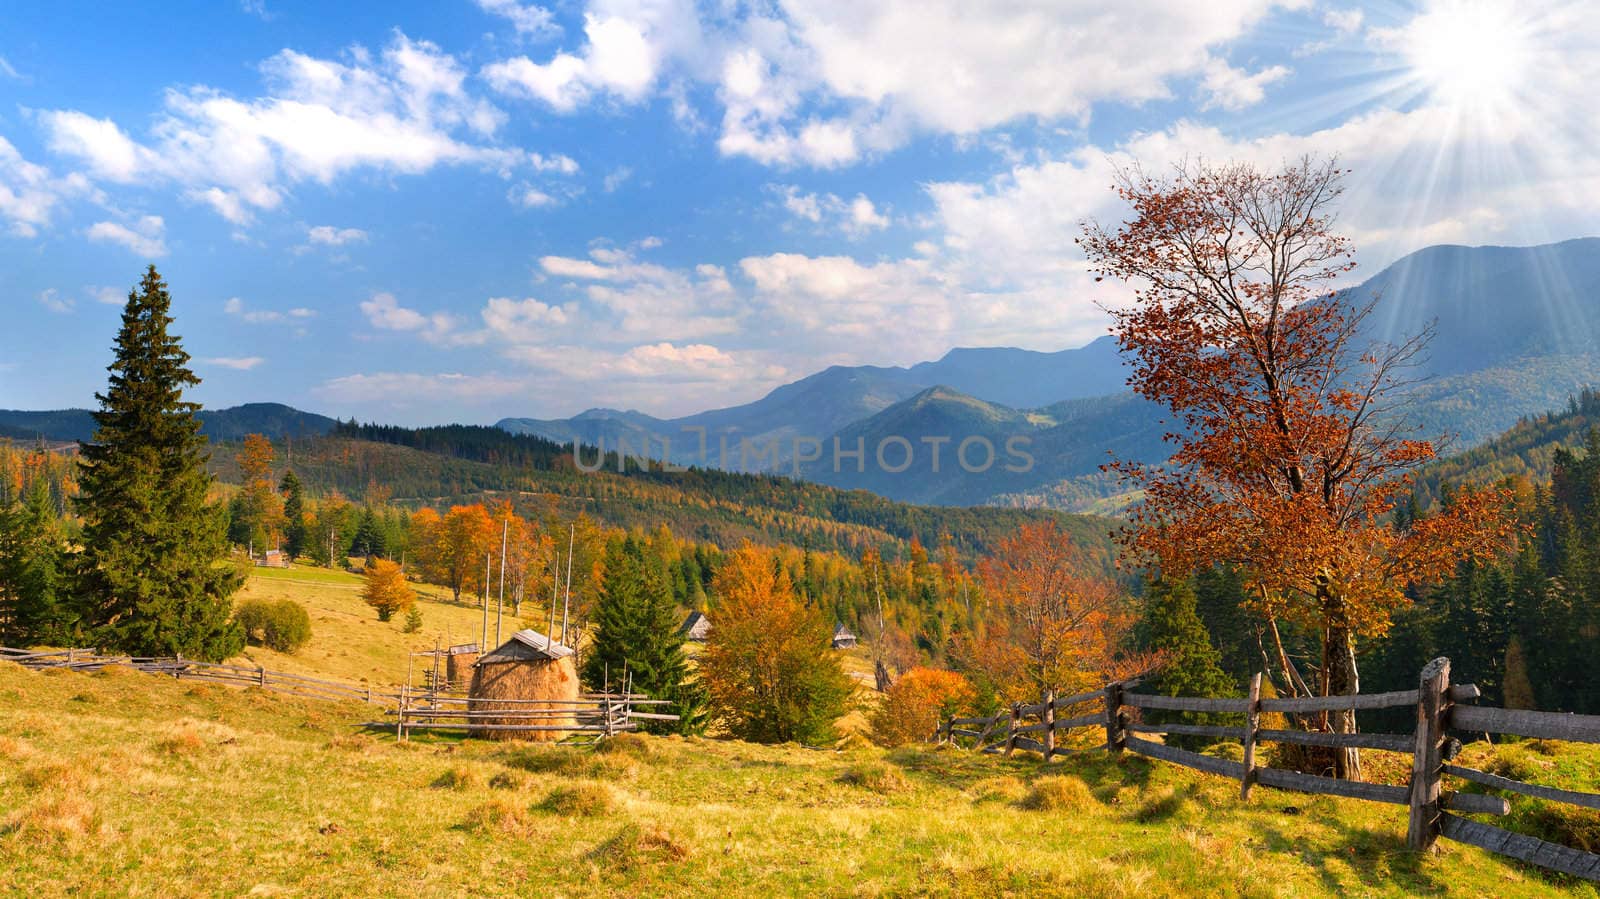 Beautiful autumn landscape in the mountains by andrew_mayovskyy